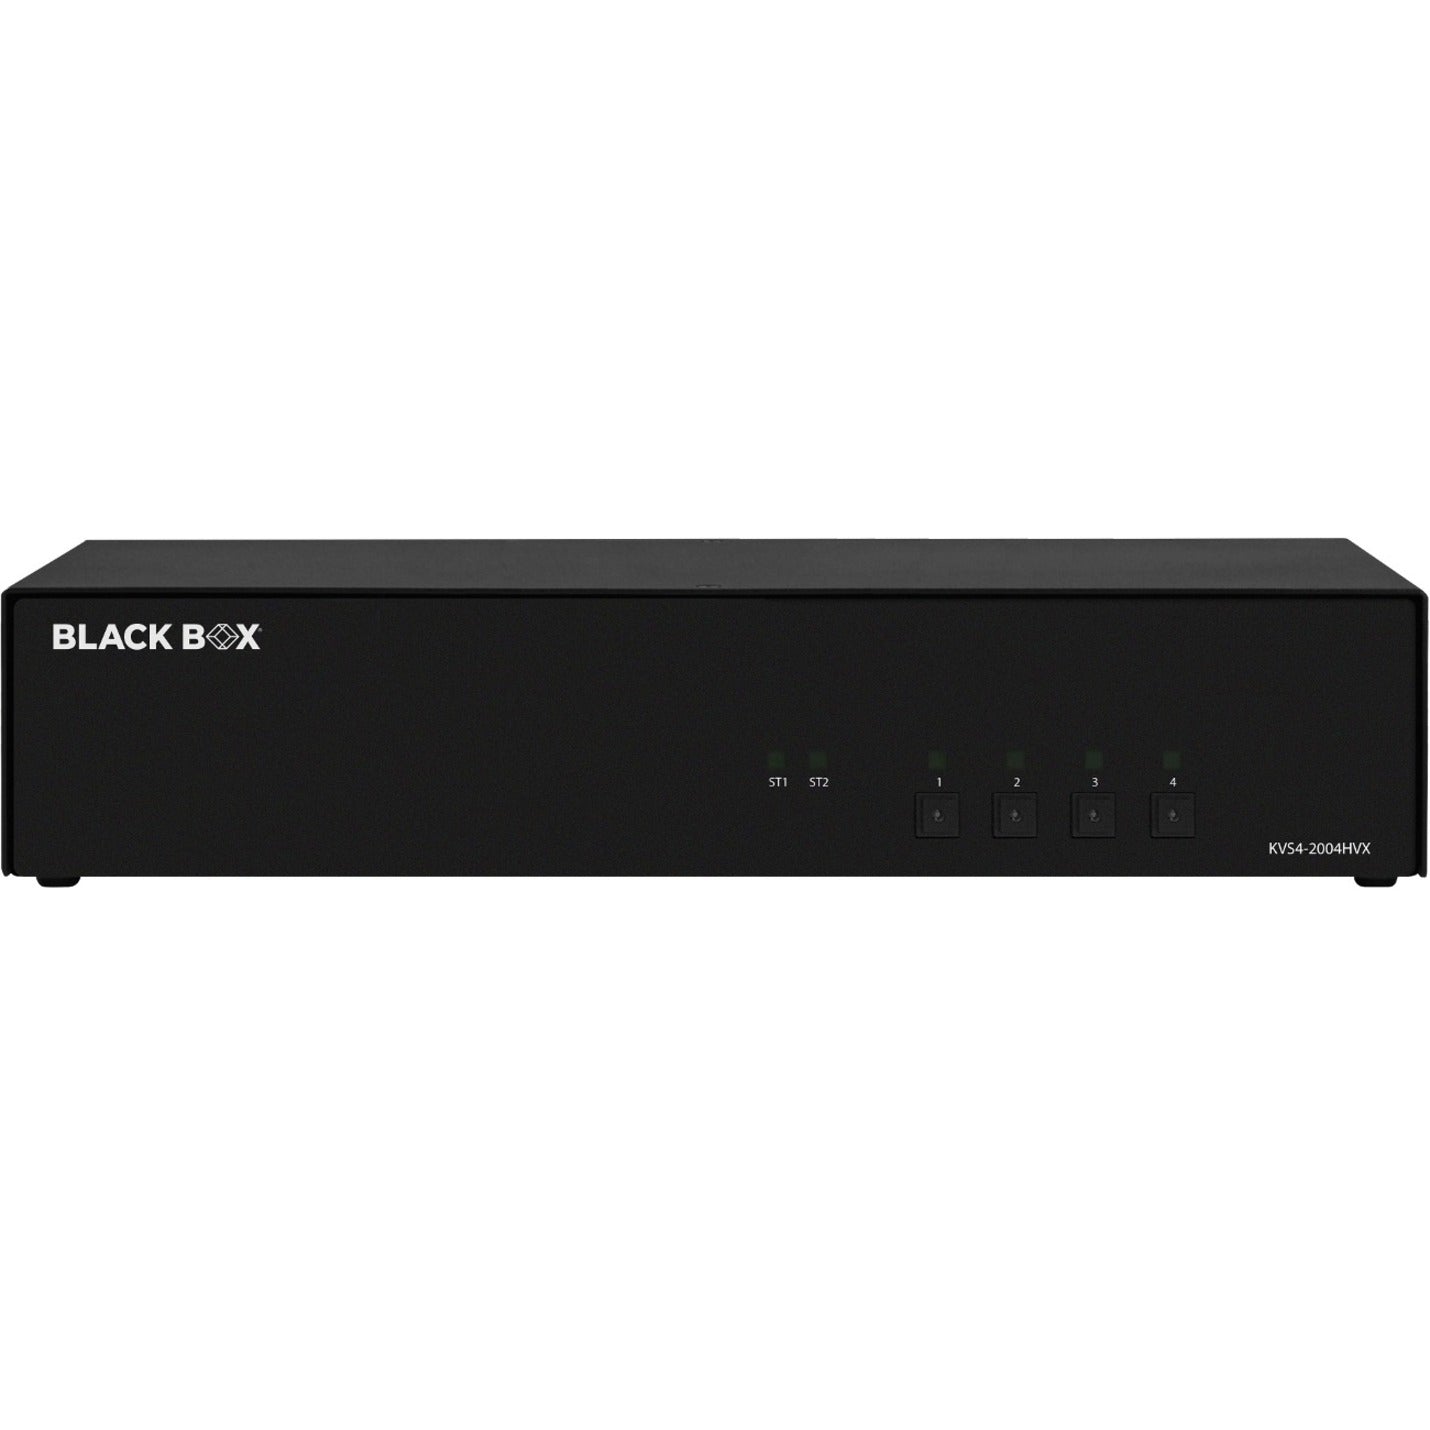 Black Box KVS4-2004HVX Secure KVM Switch - FlexPort HDMI/DisplayPort, 4 Computers Supported, 2 Local Users Supported